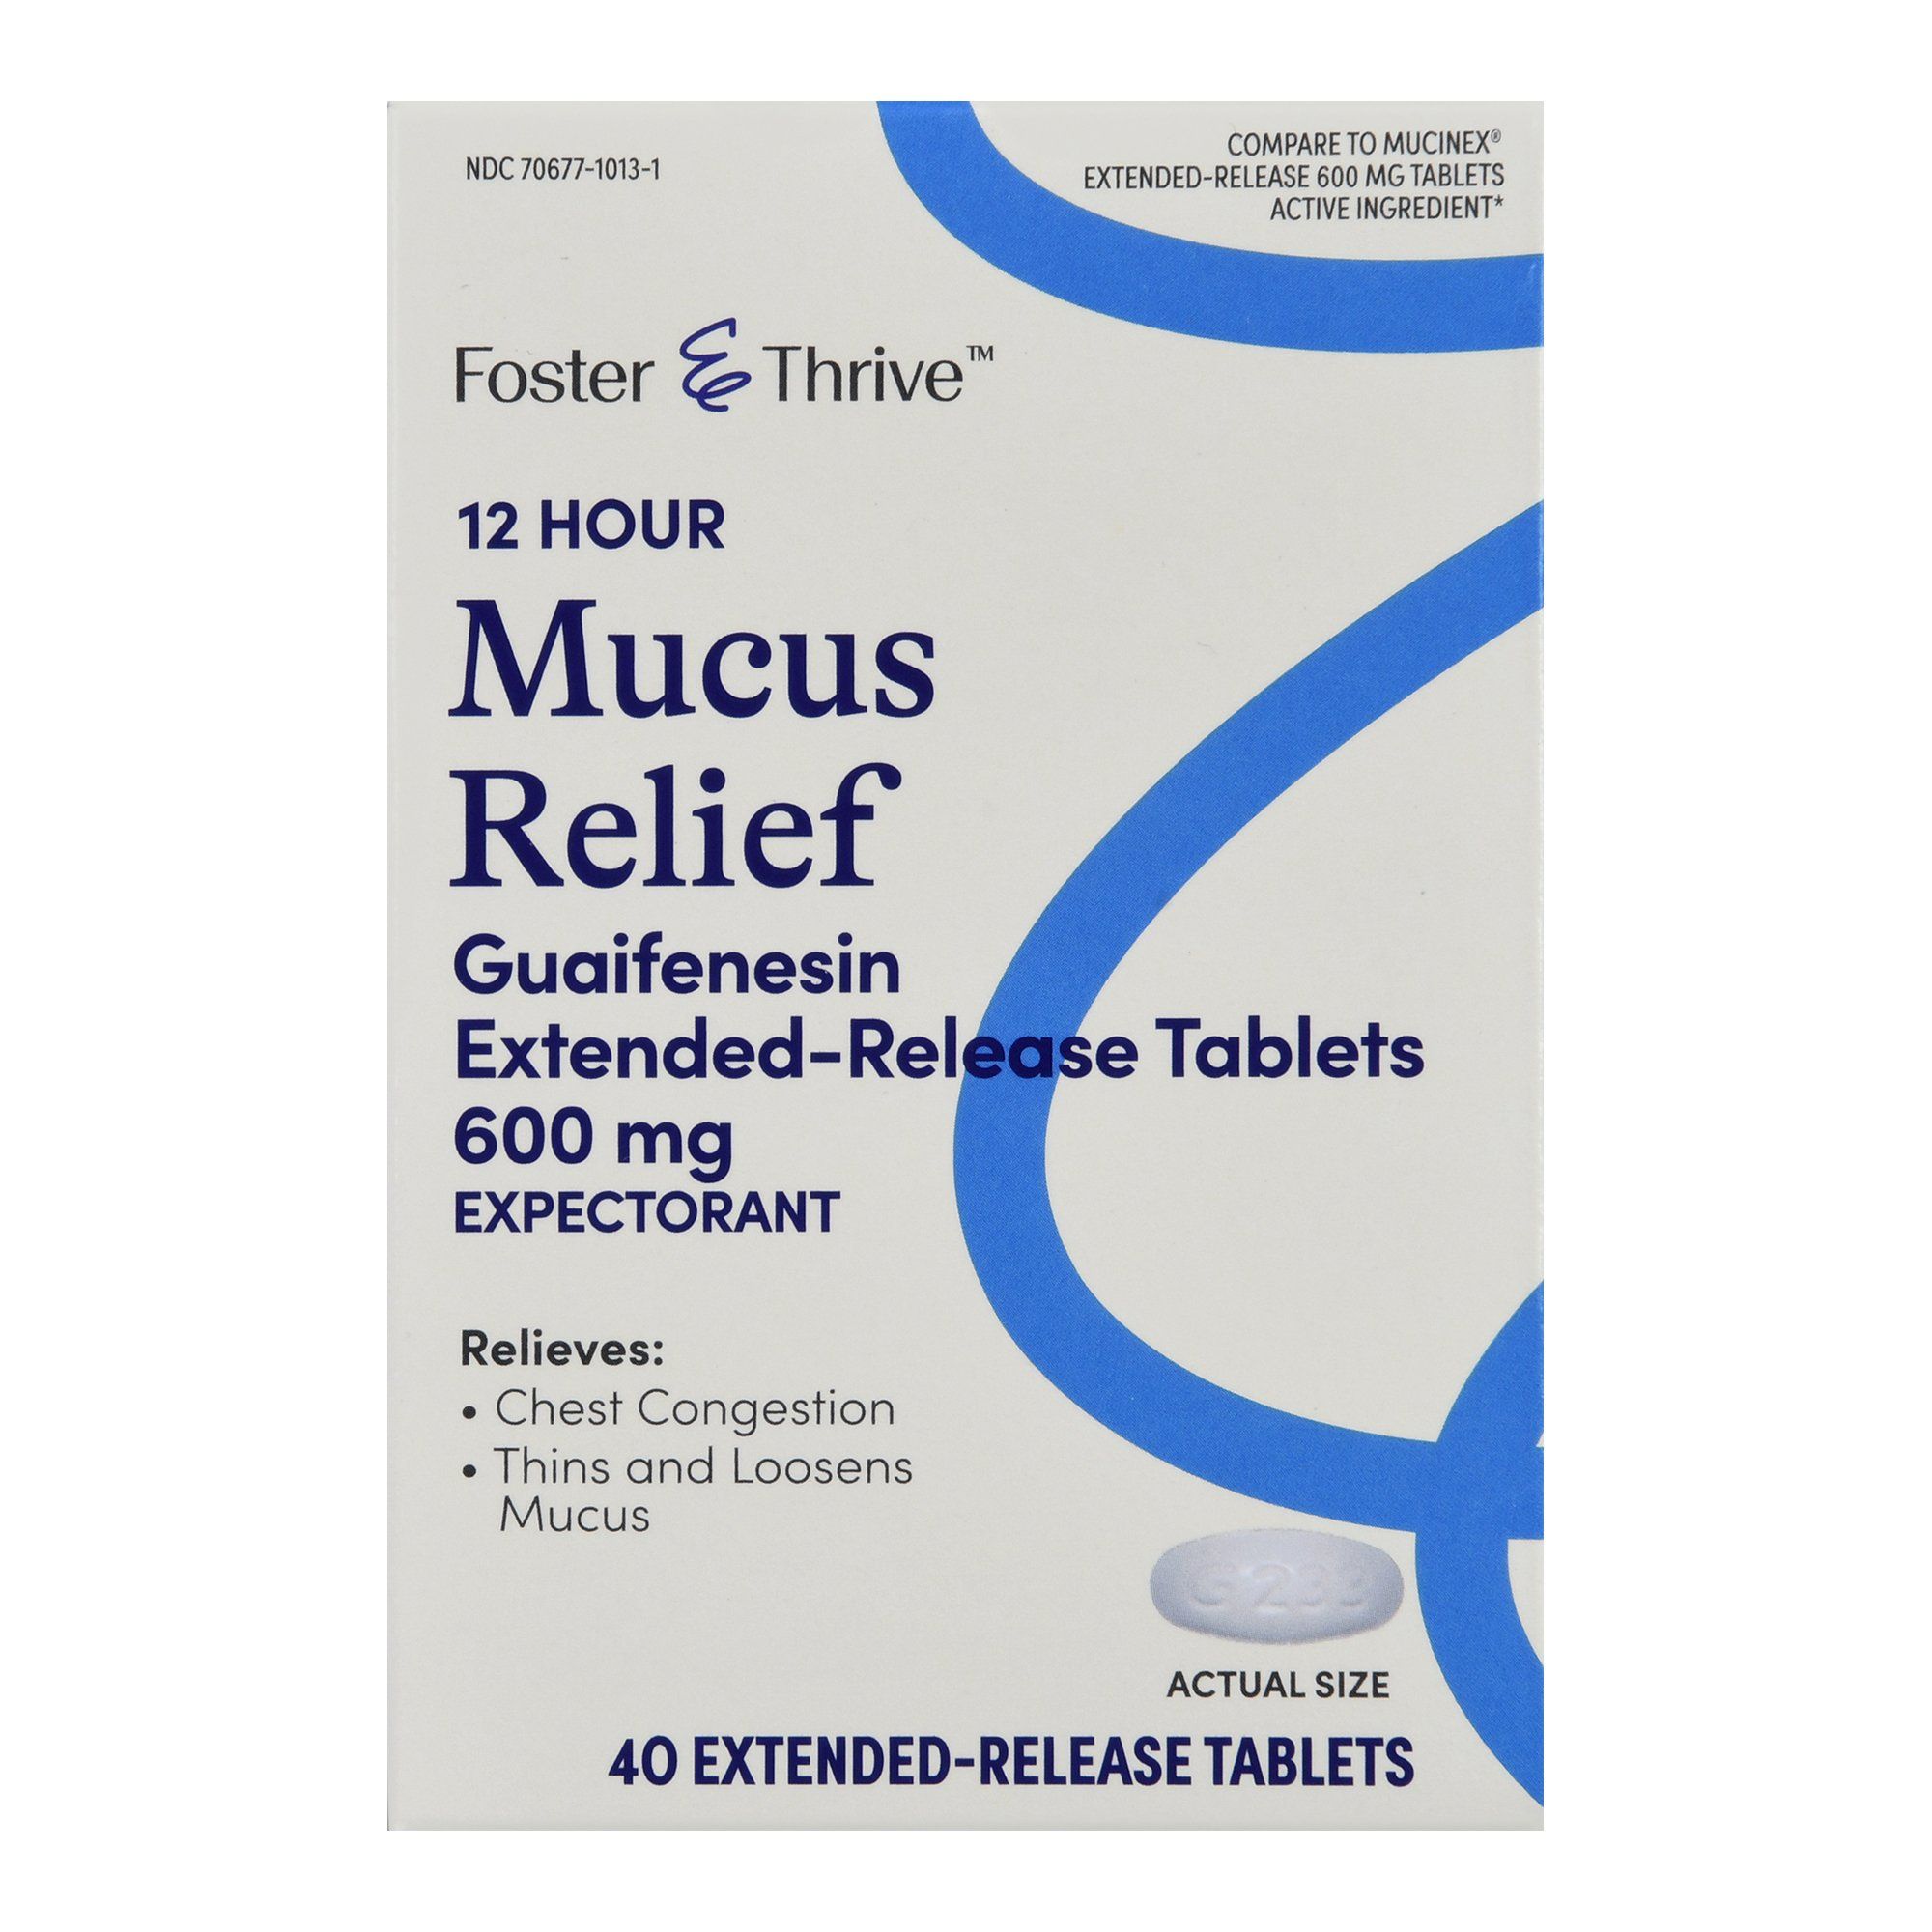 Foster & Thrive Expectorant Extended-Release Tablets, 600 mg - 40 ct